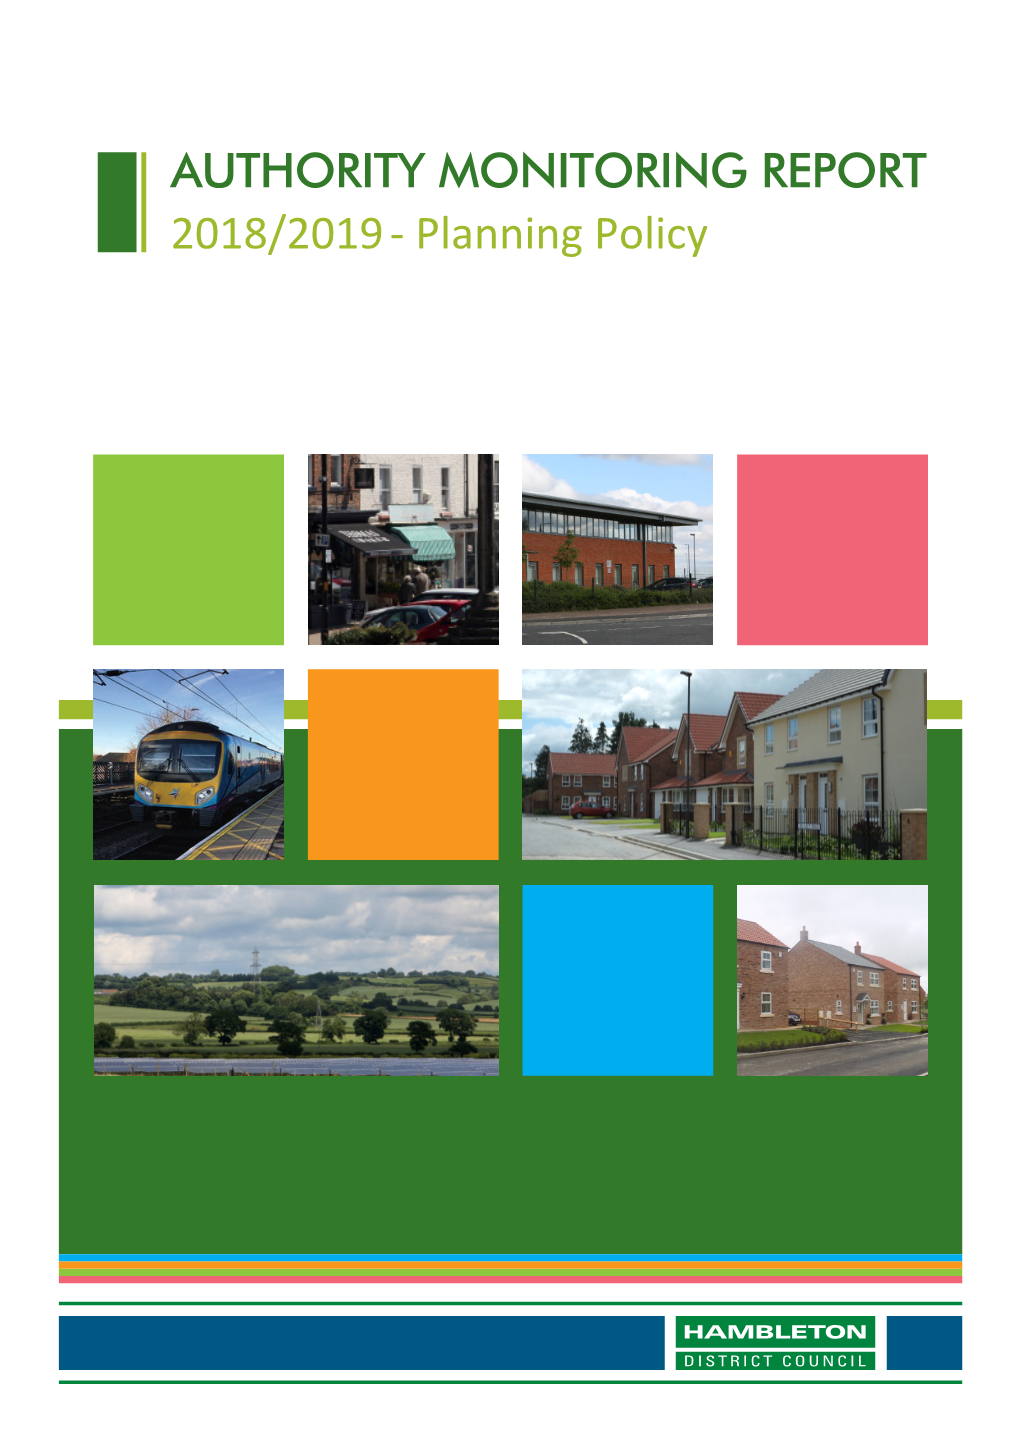 AUTHORITY MONITORING REPORT 2018/2019 - Planning Policy